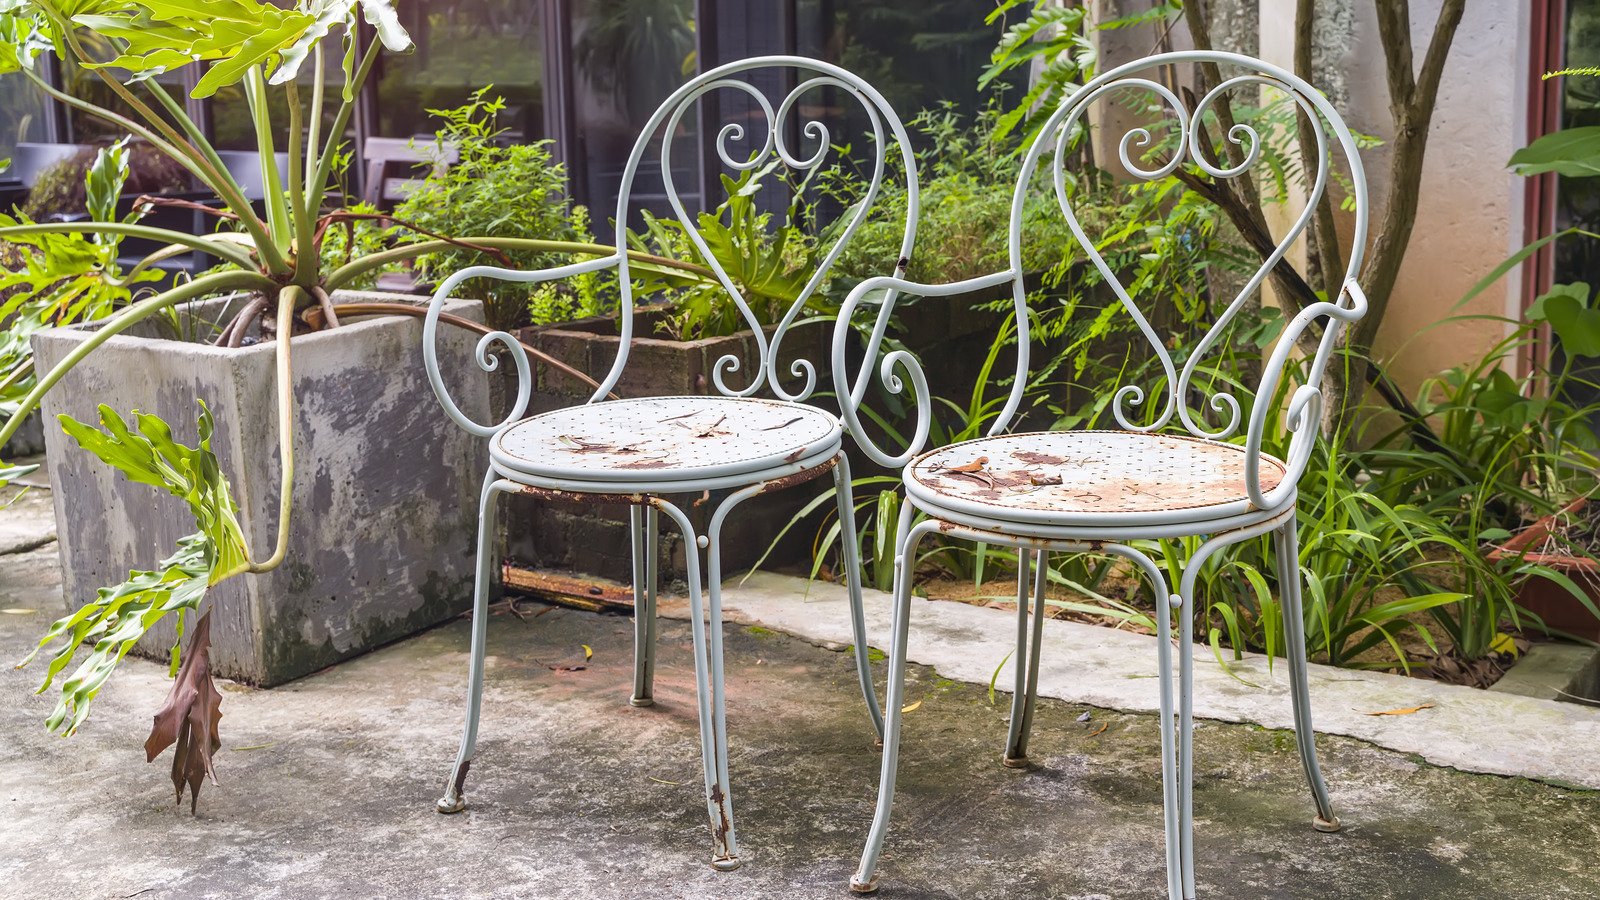 Remove Stubborn Rust From Your Outdoor Furniture With This Kitchen Staple